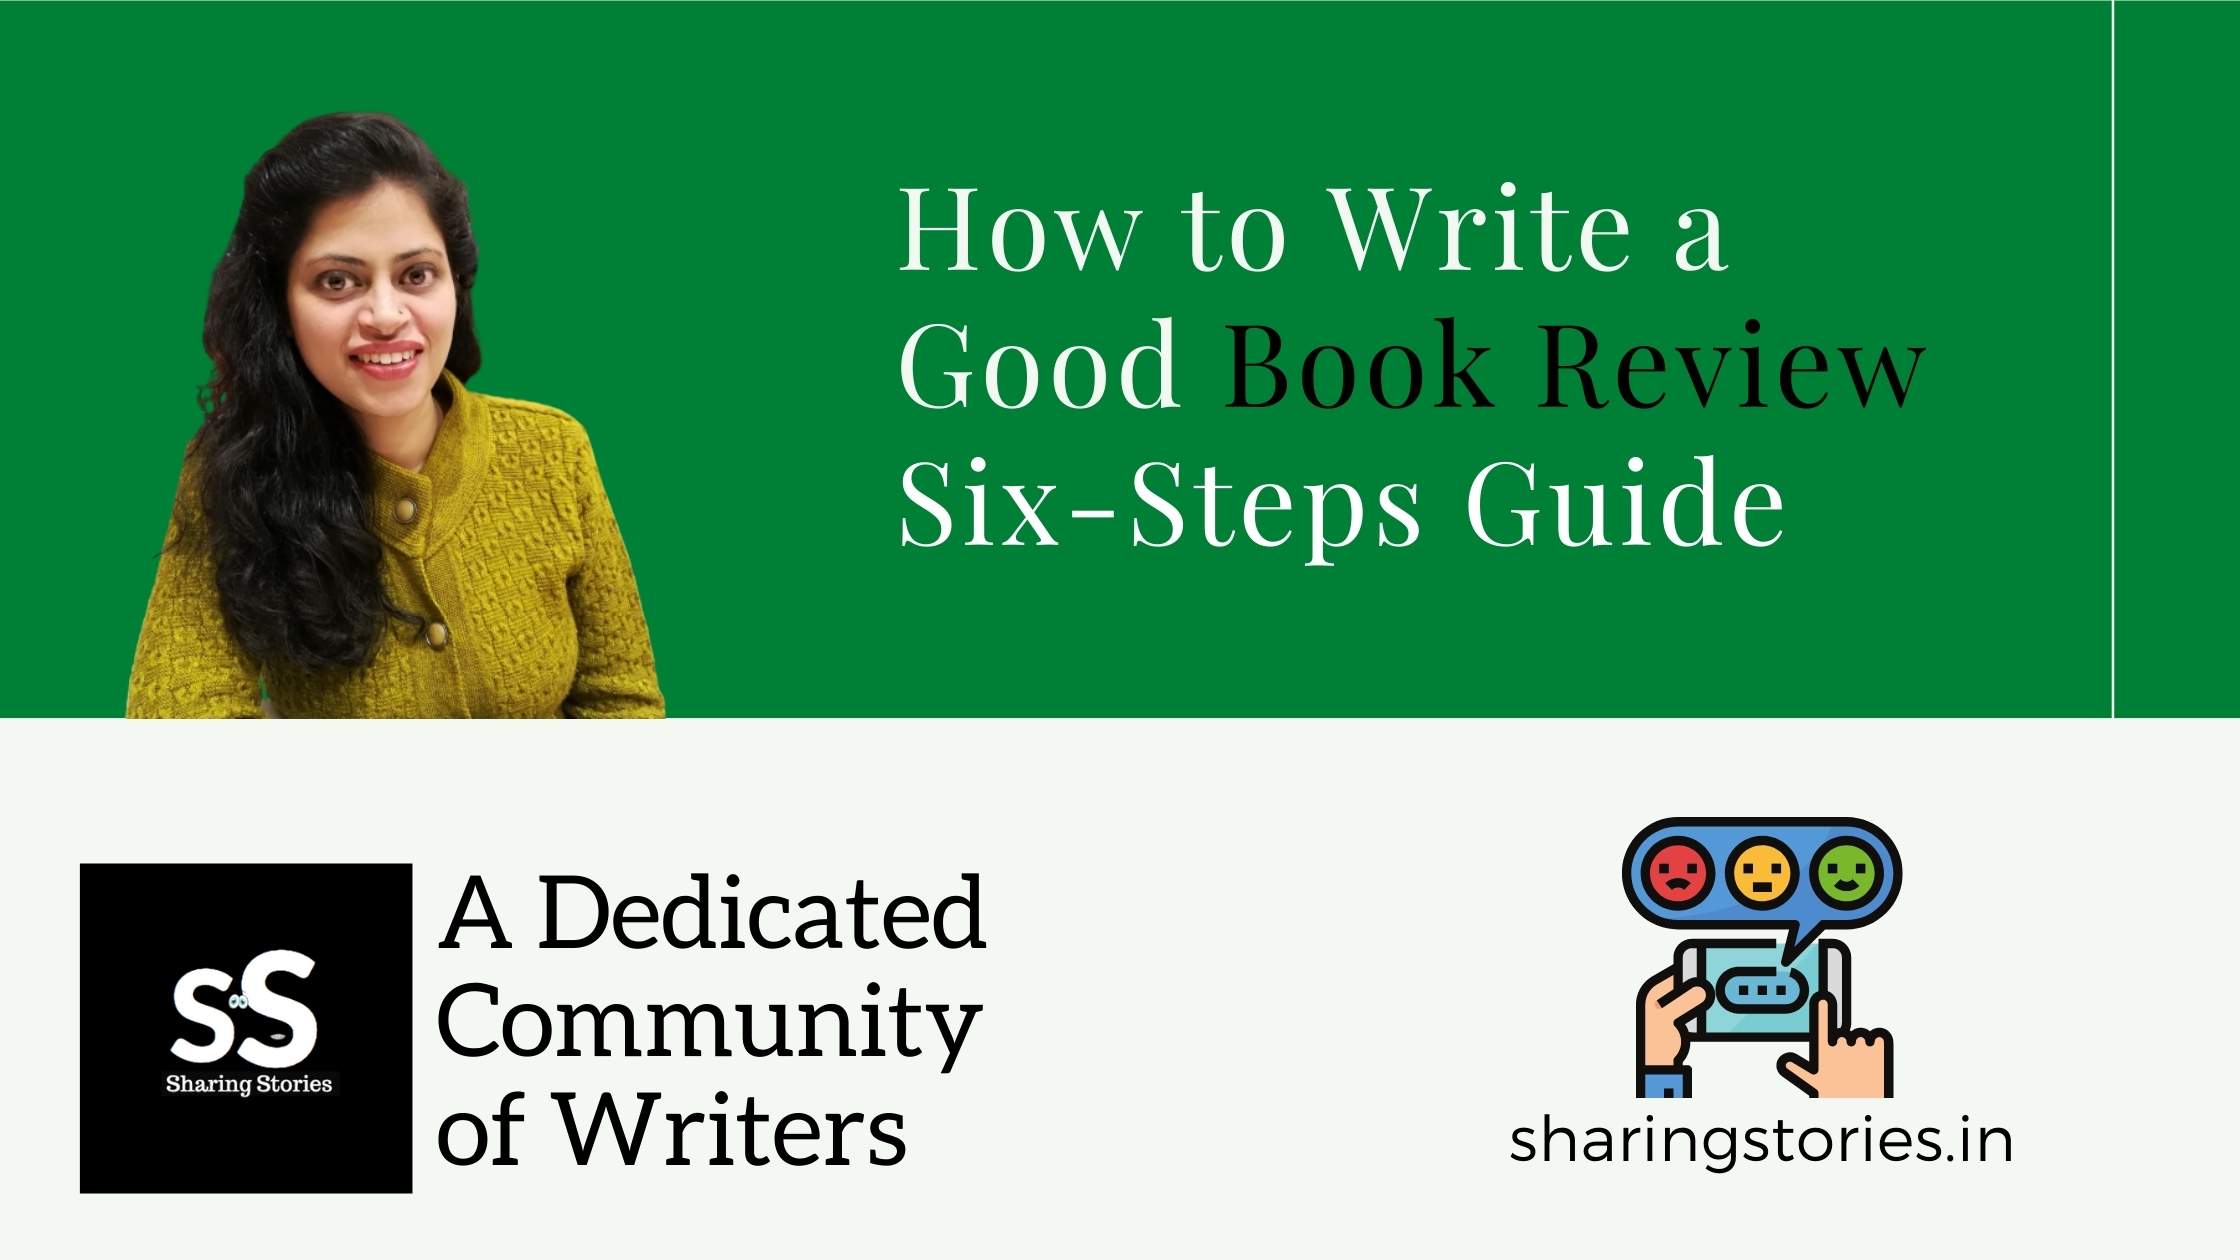 How to Write a Good Book Review  Six-Steps Guide - Sharing Stories